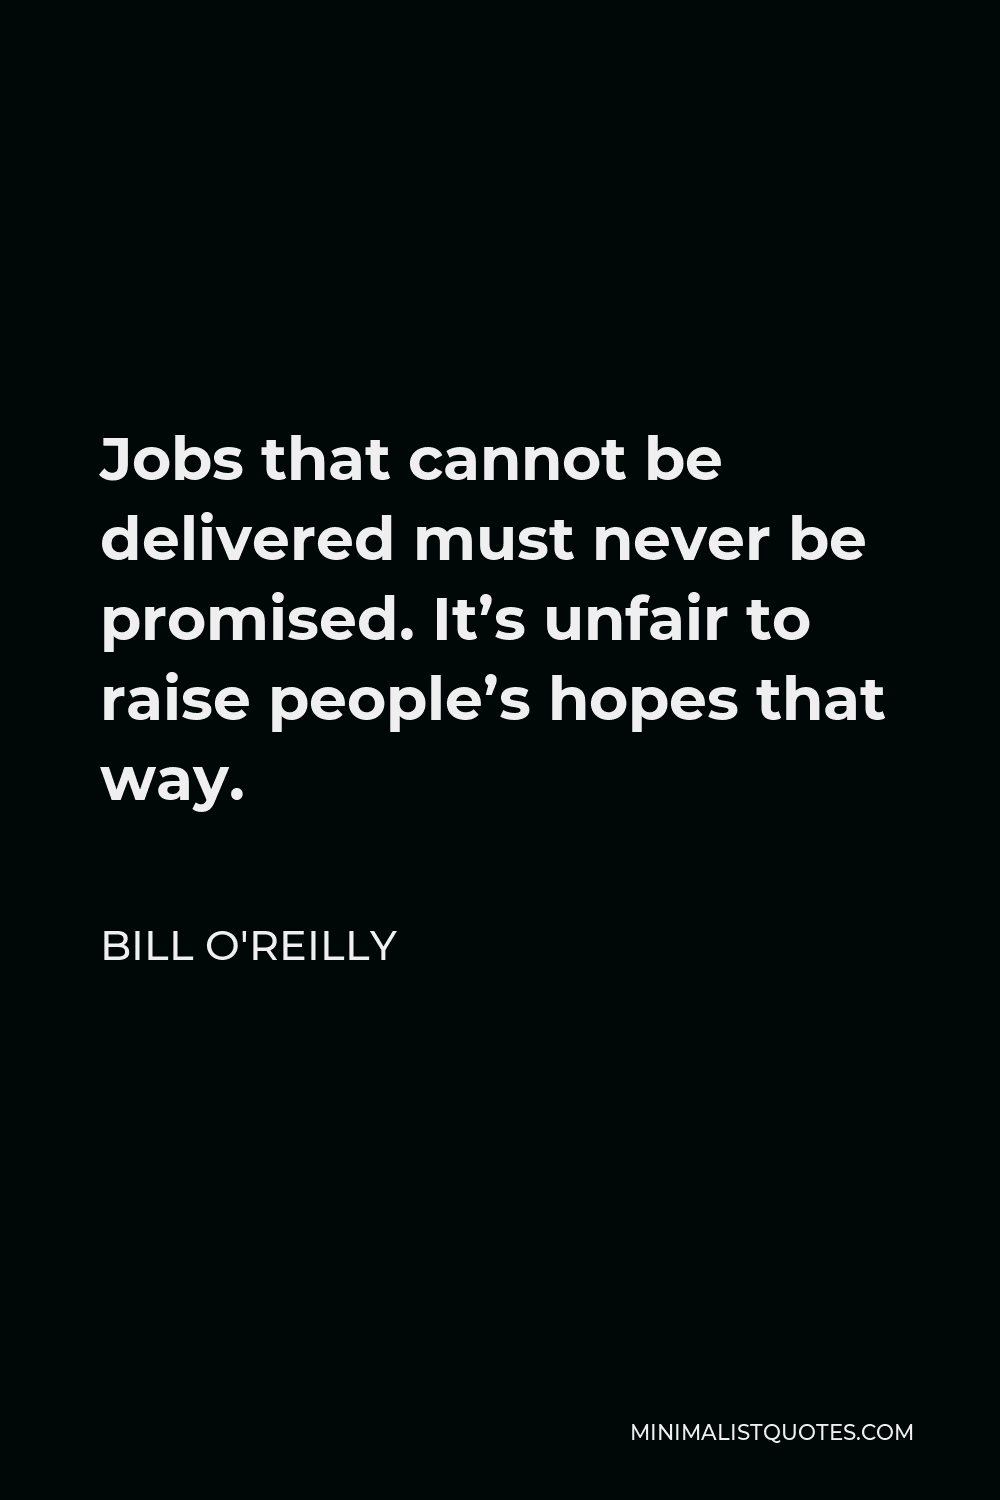 Bill O'Reilly Quote - Jobs that cannot be delivered must never be promised. It’s unfair to raise people’s hopes that way.